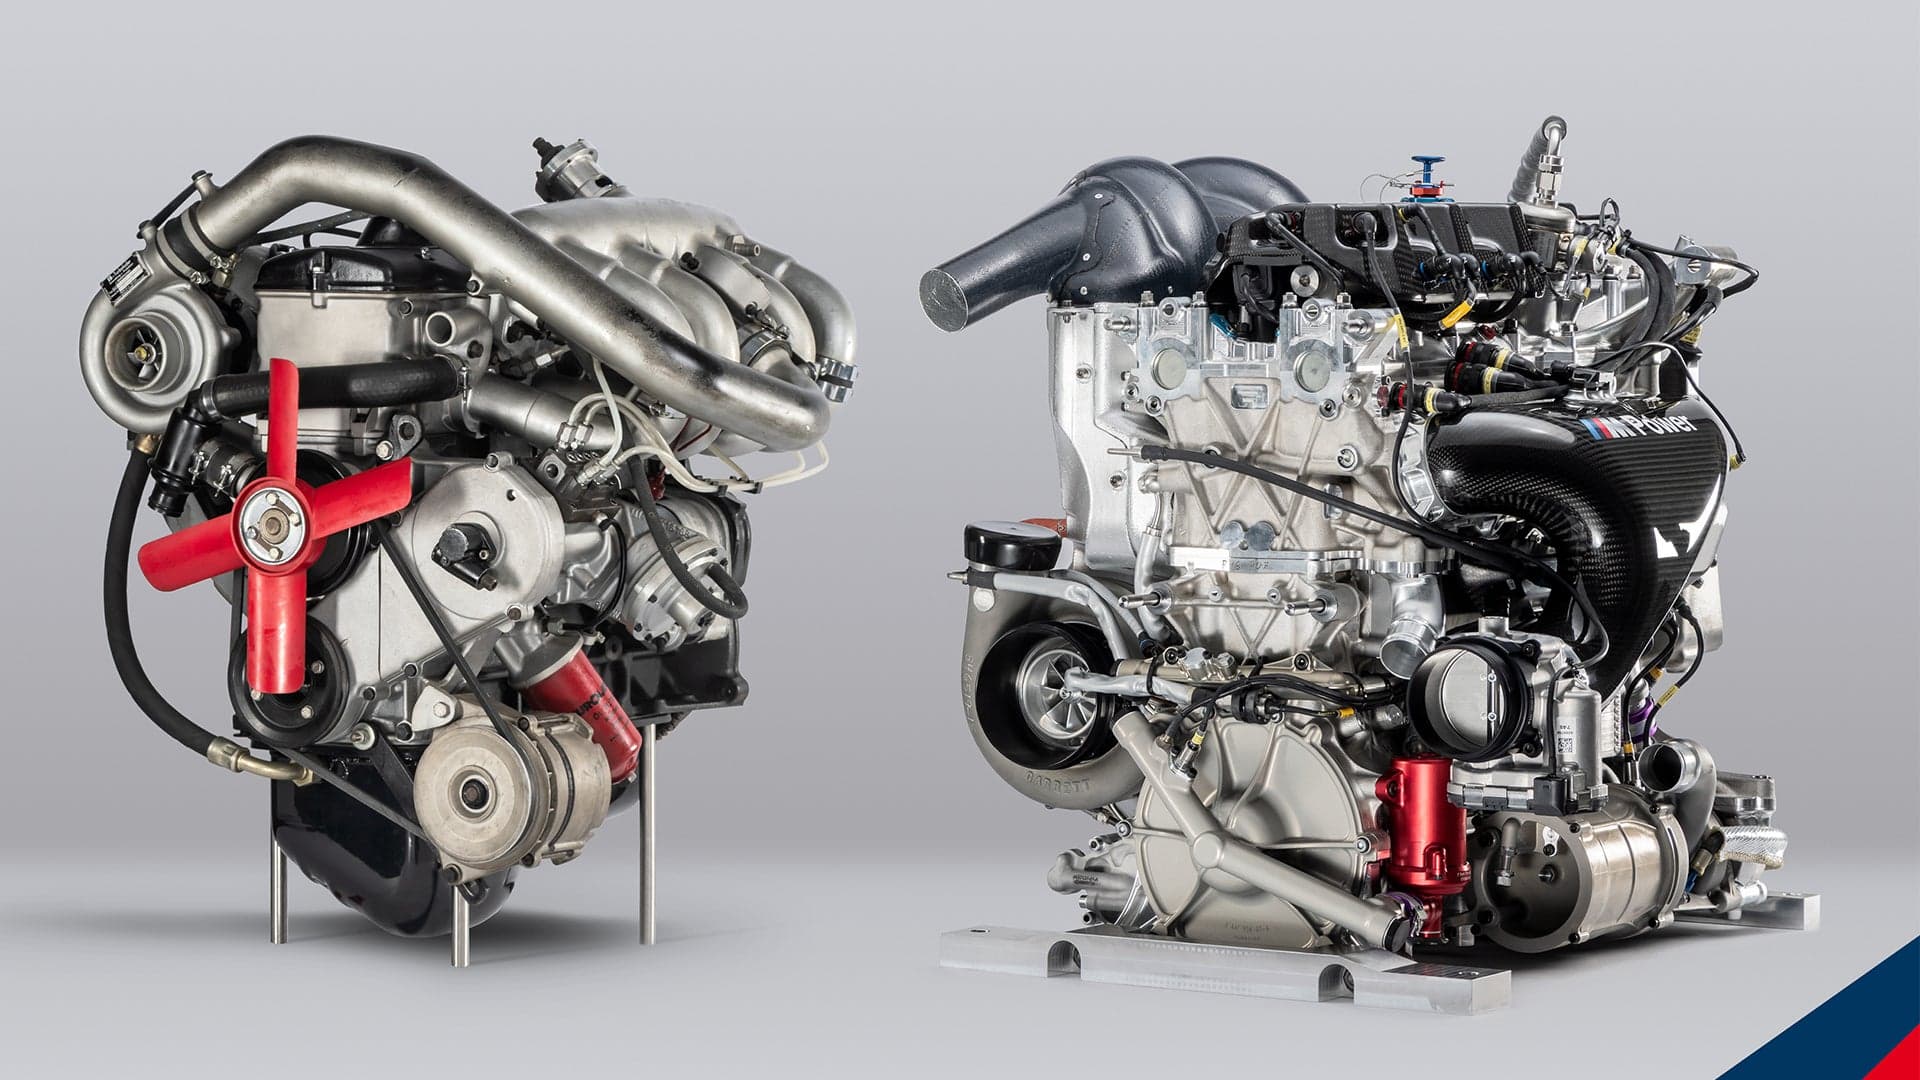 BMW’s New 600-HP 4-Cylinder Engine Shows How Far Engineering Has Come Since 1969